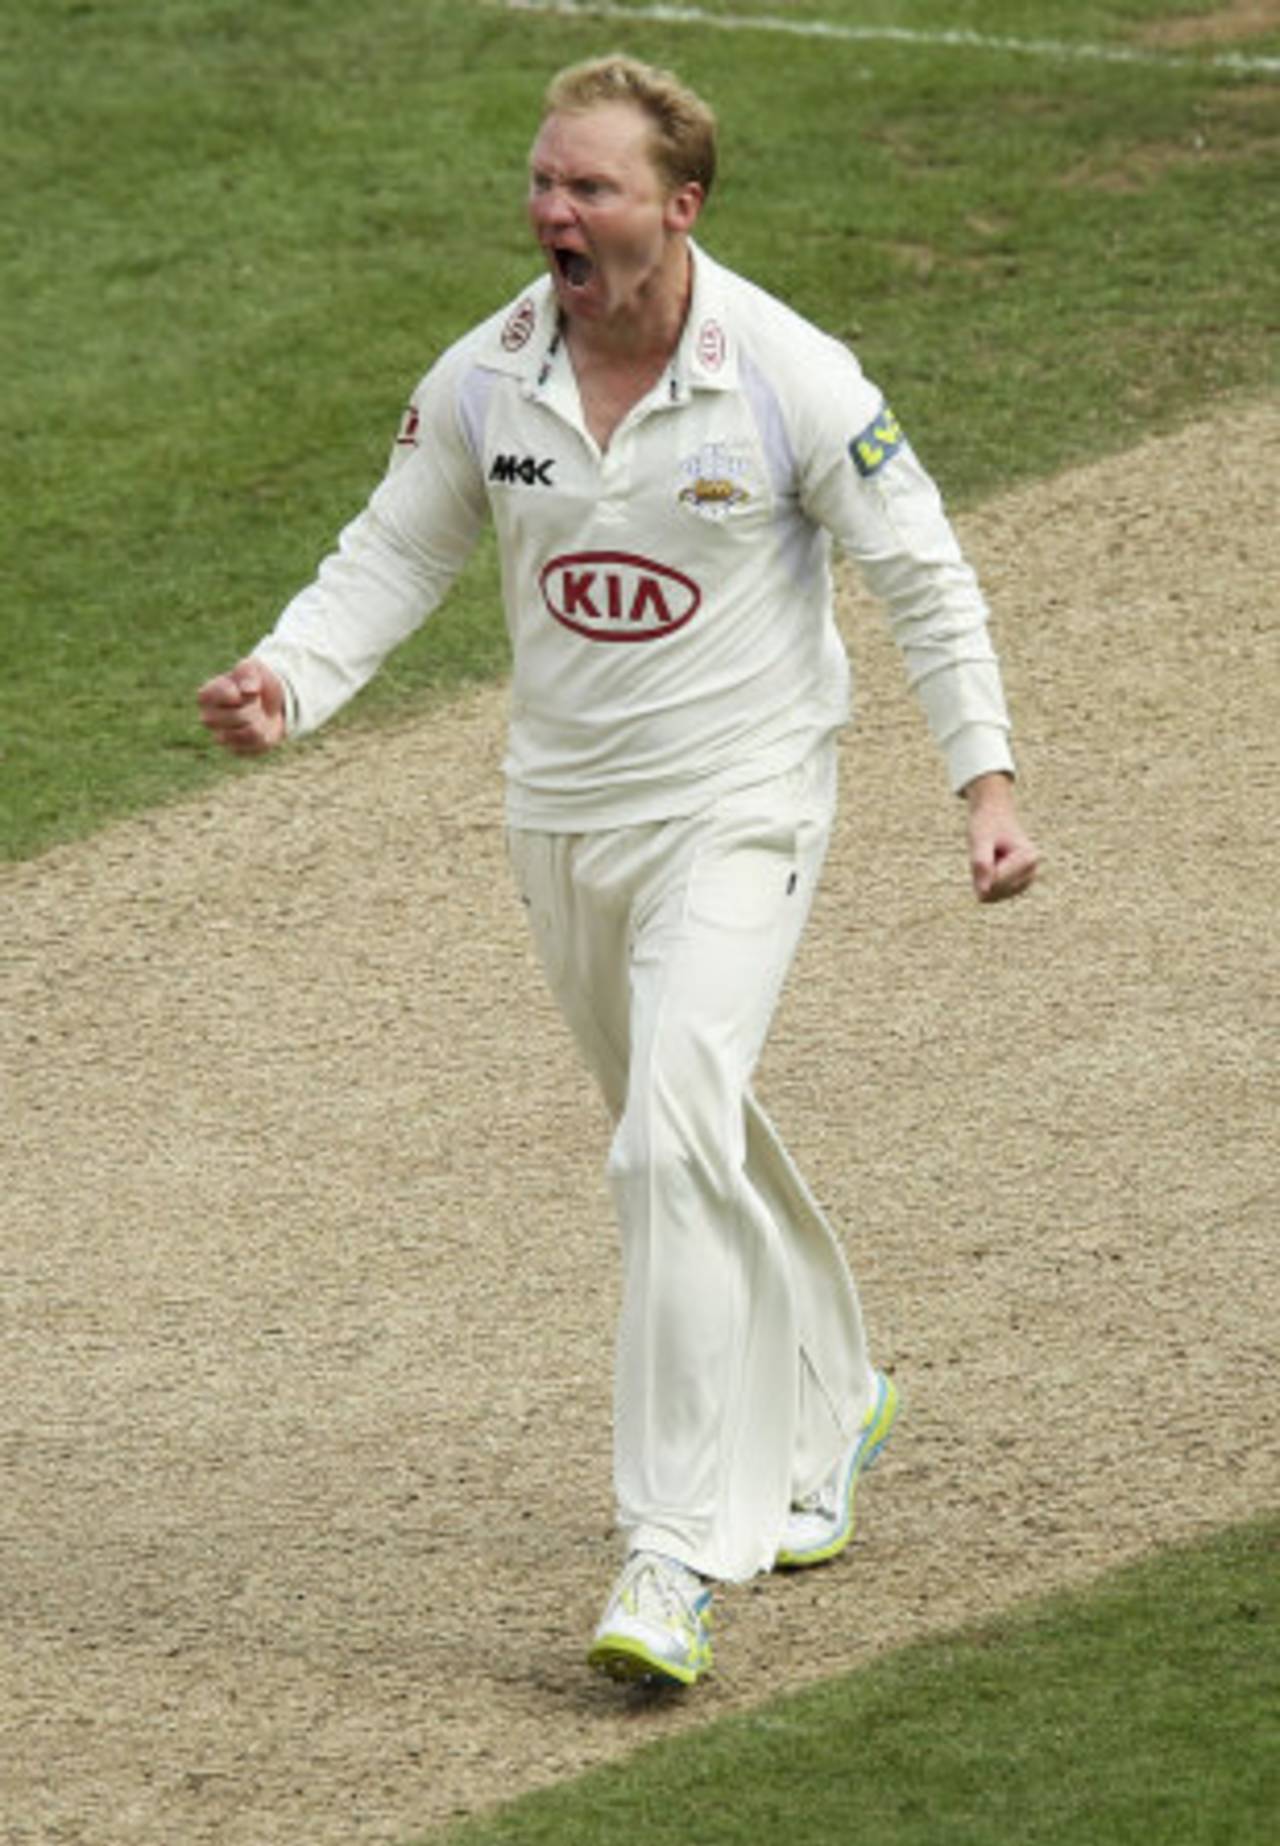 Gareth Batty said he may have reconsidered his appeal had he been given time to reflect&nbsp;&nbsp;&bull;&nbsp;&nbsp;Getty Images